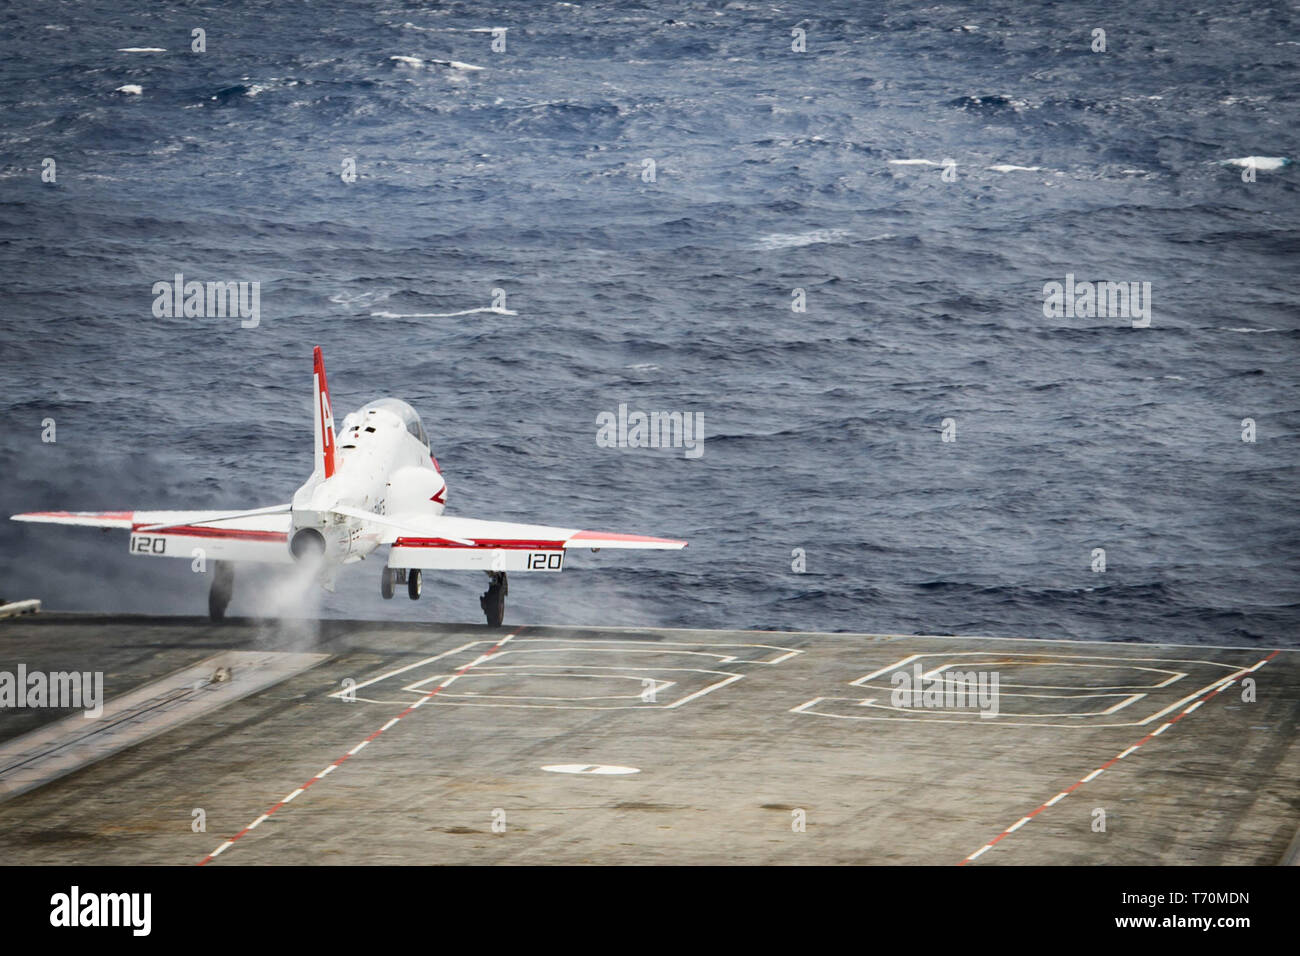 190502-N-KT825-0096  ATLANTIC OCEAN (May 2, 2019) A T-45C Goshawk training aircraft assigned to Training Air Wing (TW) 2 launches from the flight deck aboard the aircraft carrier USS Dwight D. Eisenhower (CVN 69). Ike is underway in the Atlantic Ocean conducting carrier qualifications while in the basic phase of the Optimized Fleet Response Plan. (U.S. Navy photo by Mass Communication Specialist Seaman Sawyer Haskins) Stock Photo